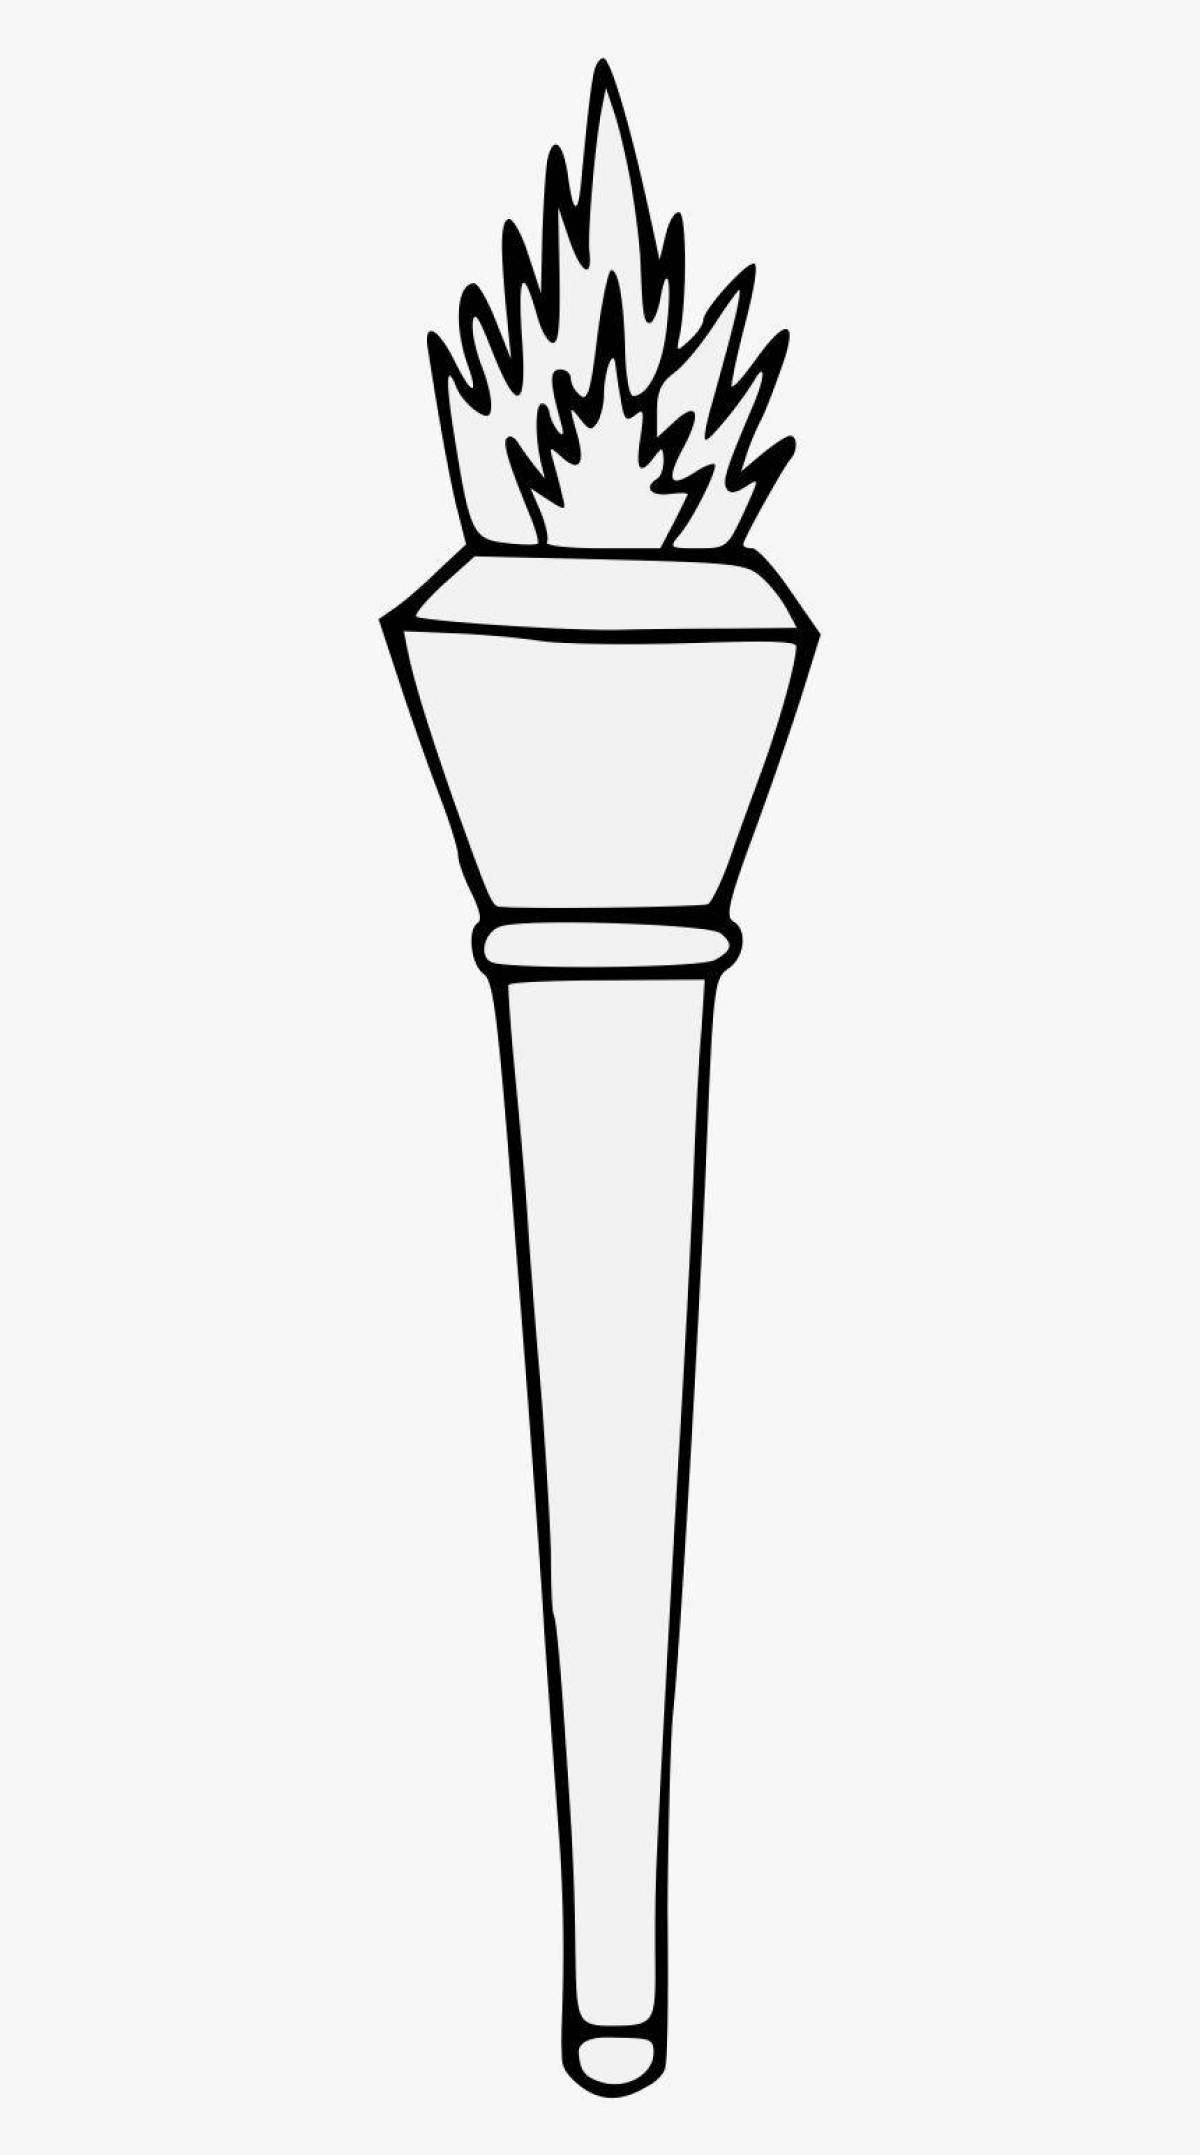 Coloring page famous olympic torch